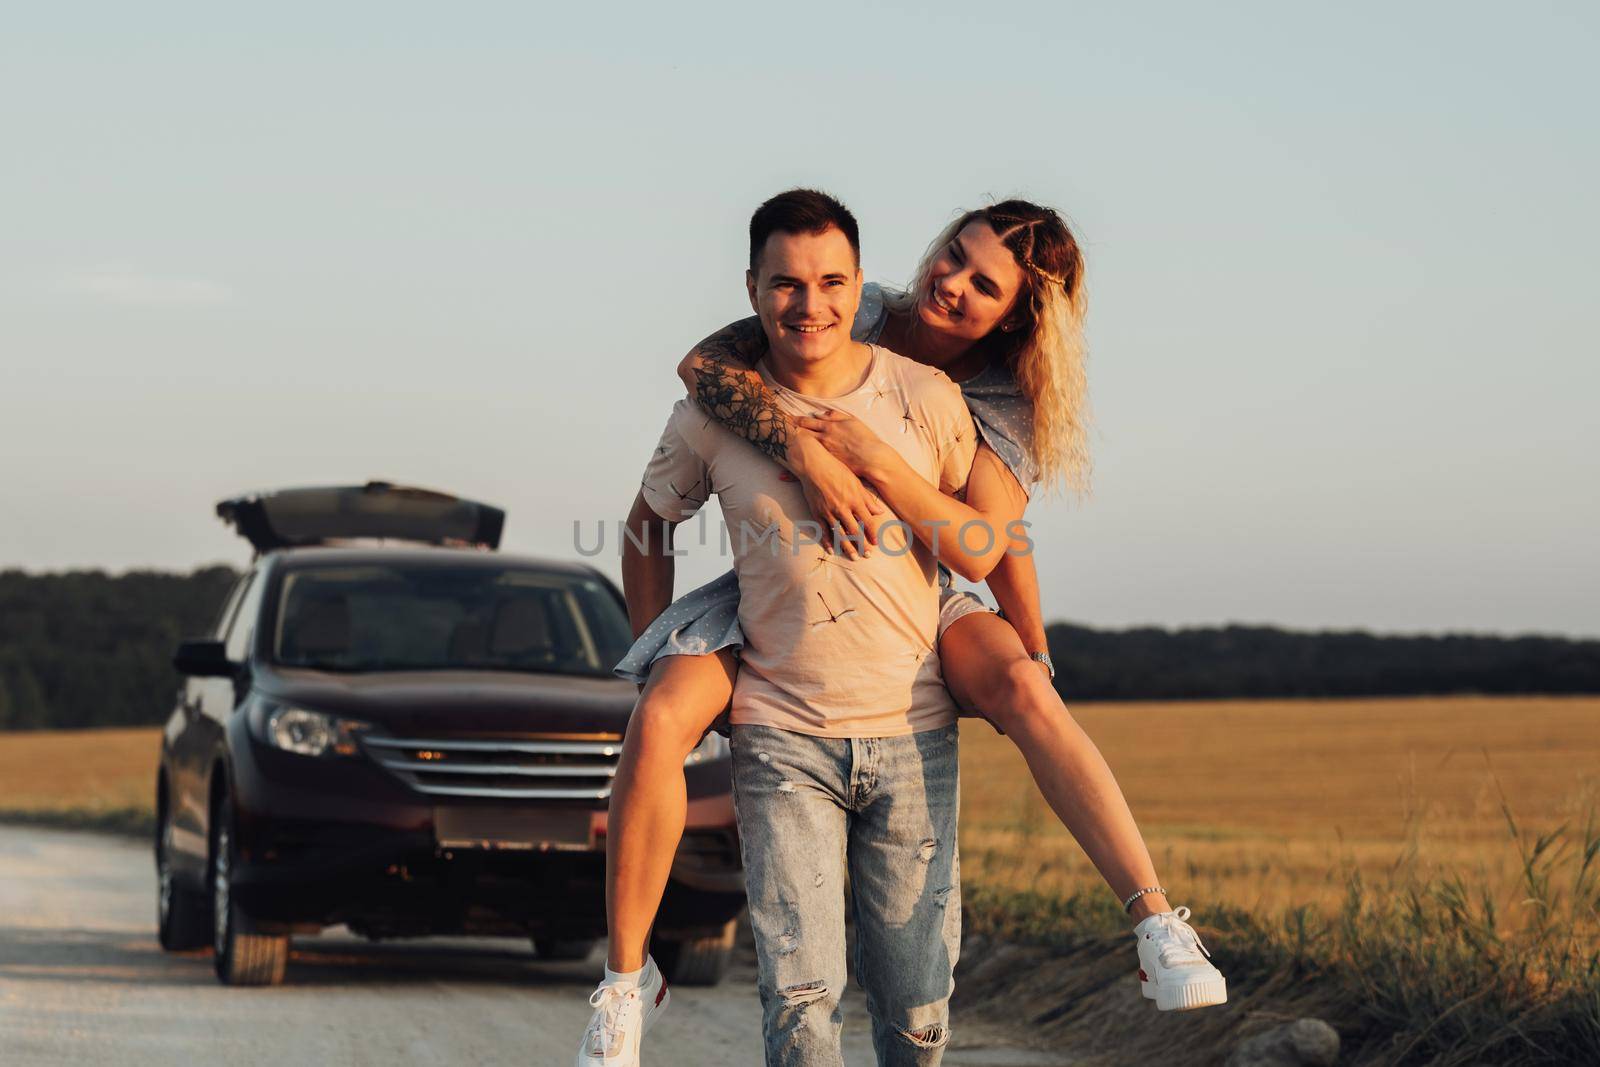 Caucasian Man Carries Girlfriend on His Back on the Background of Their SUV Car, Young Couple Enjoying Their Road Trip at Sunset by Romvy